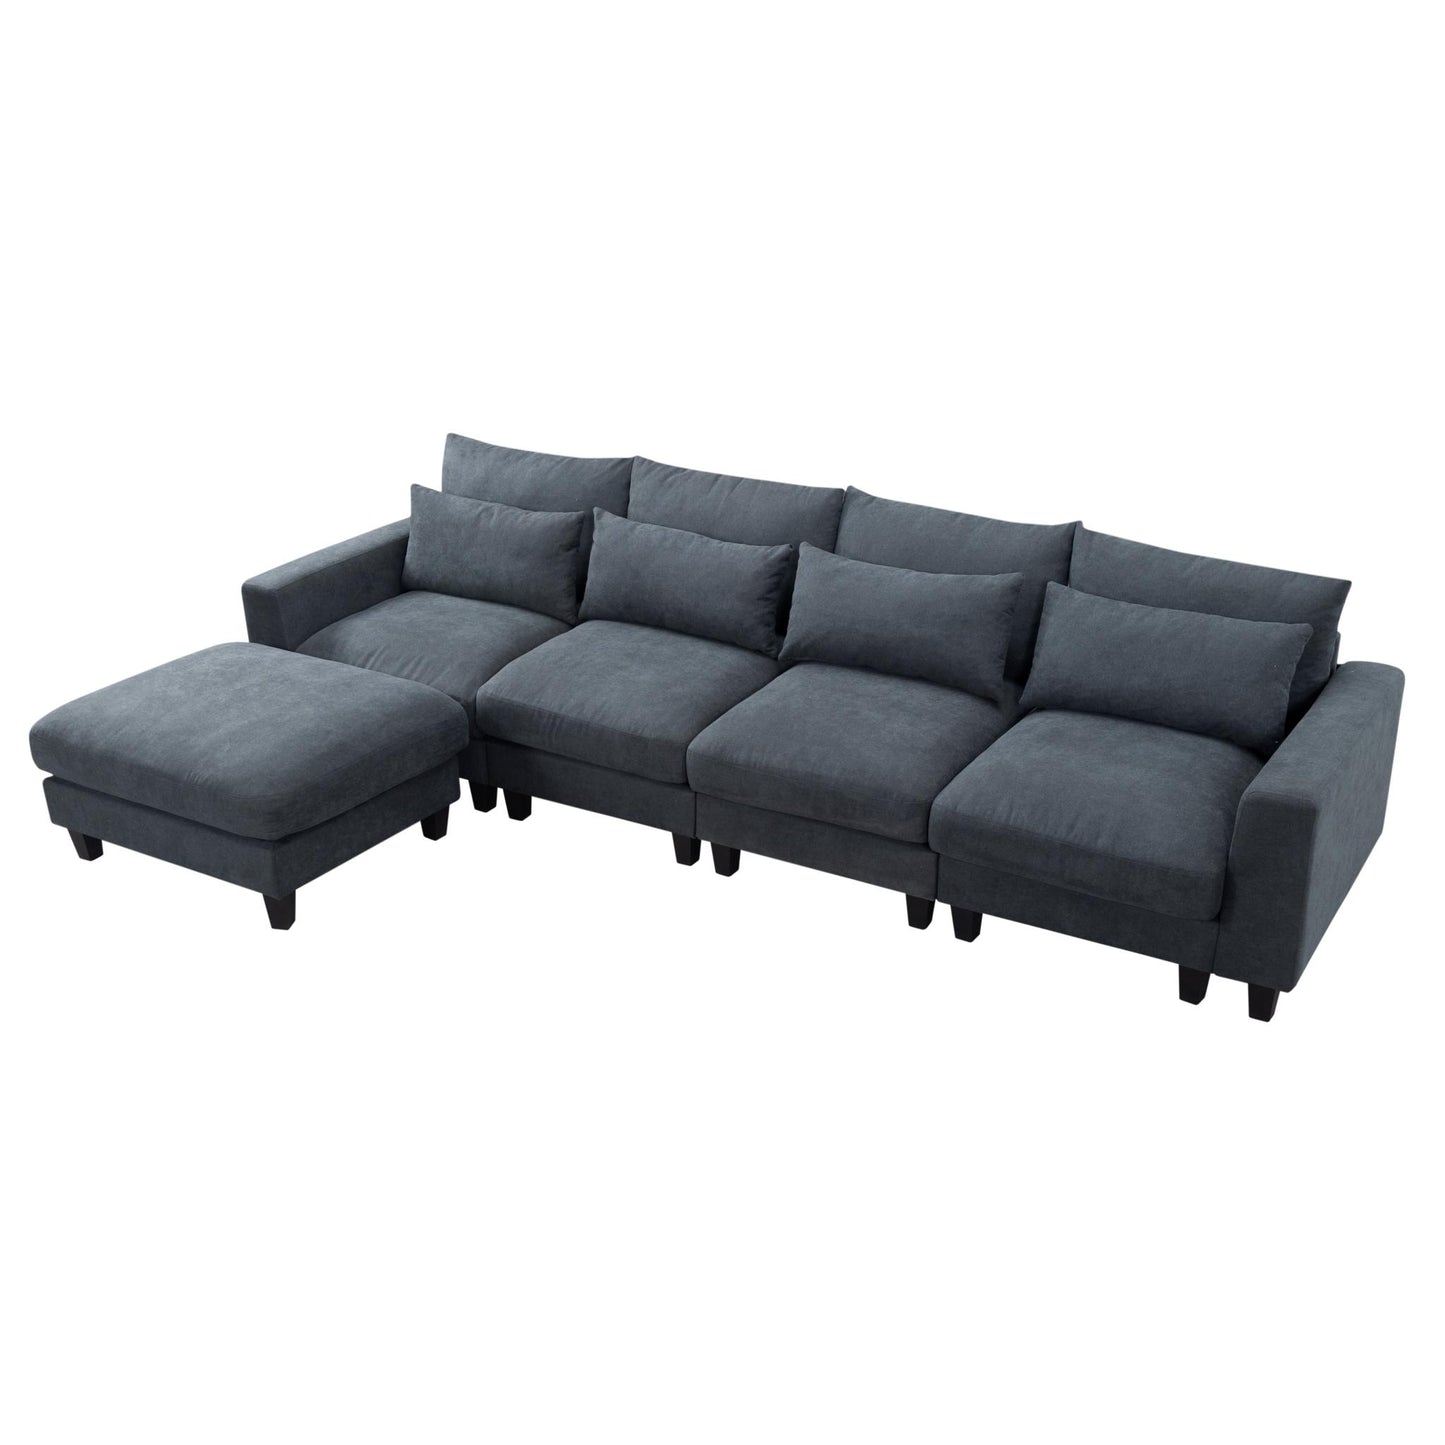 Vogue Vantage Lounge L-Shaped Sectional Sofa with Ottoman